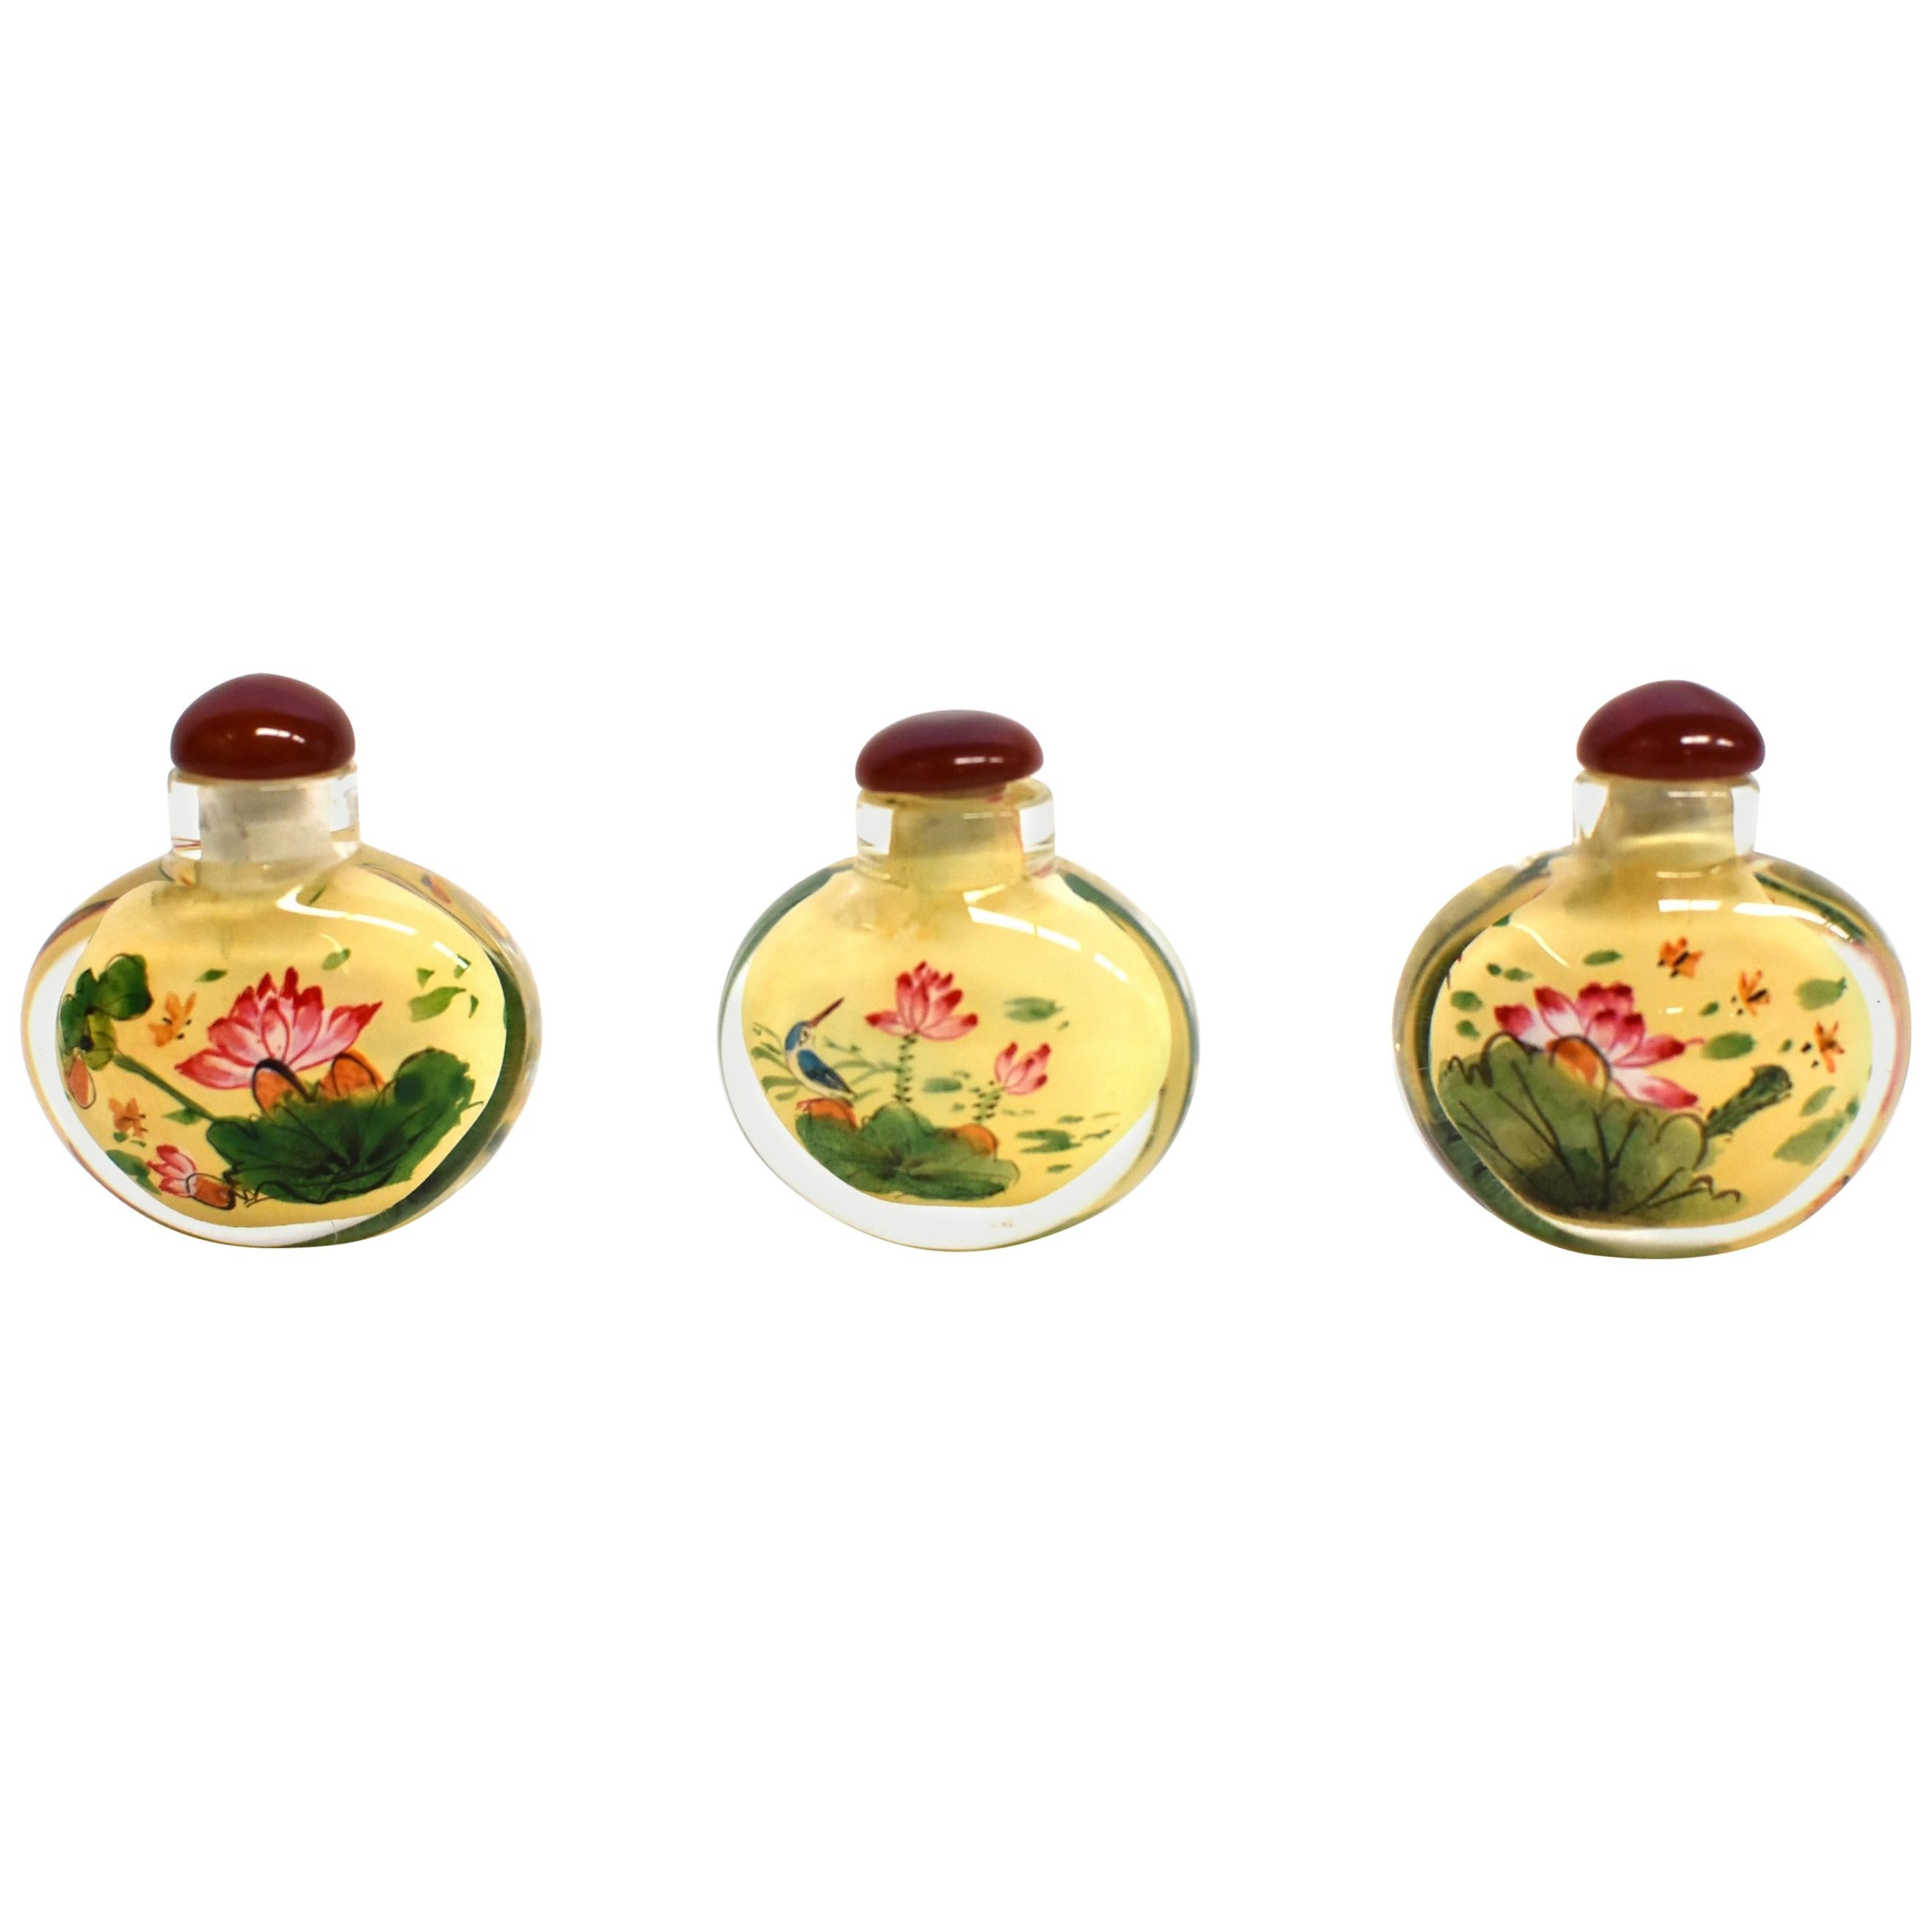 Set of Three Eglomise Reverse Painted Snuff Bottles with Lotus